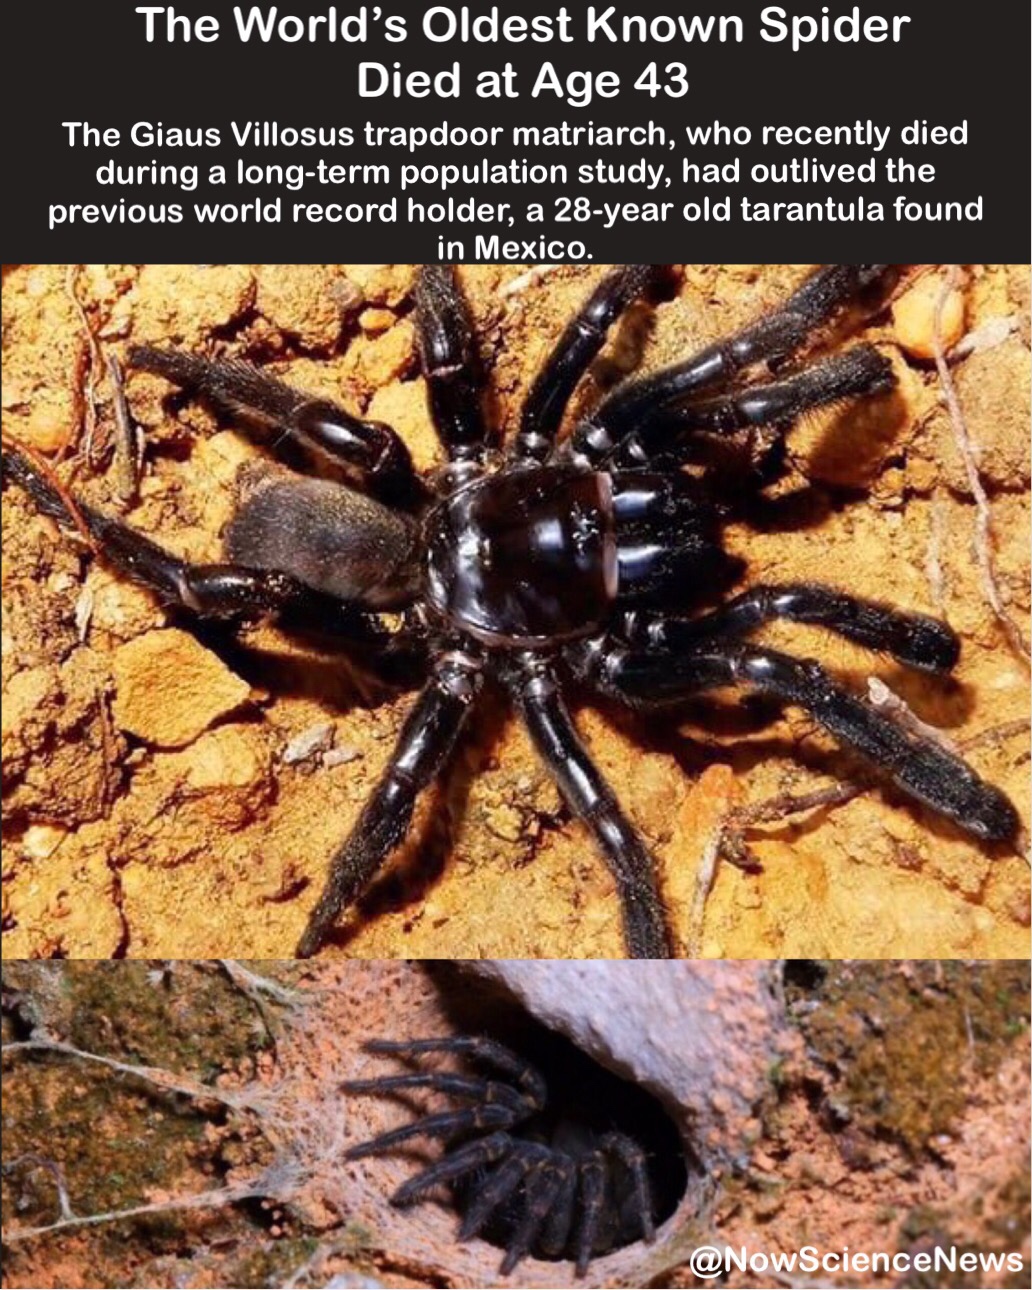 random world's oldest spider - The World's Oldest known Spider Died at Age 43 The Giaus Villosus trapdoor matriarch, who recently died during a longterm population study, had outlived the previous world record holder, a 28year old tarantula found in Mexic